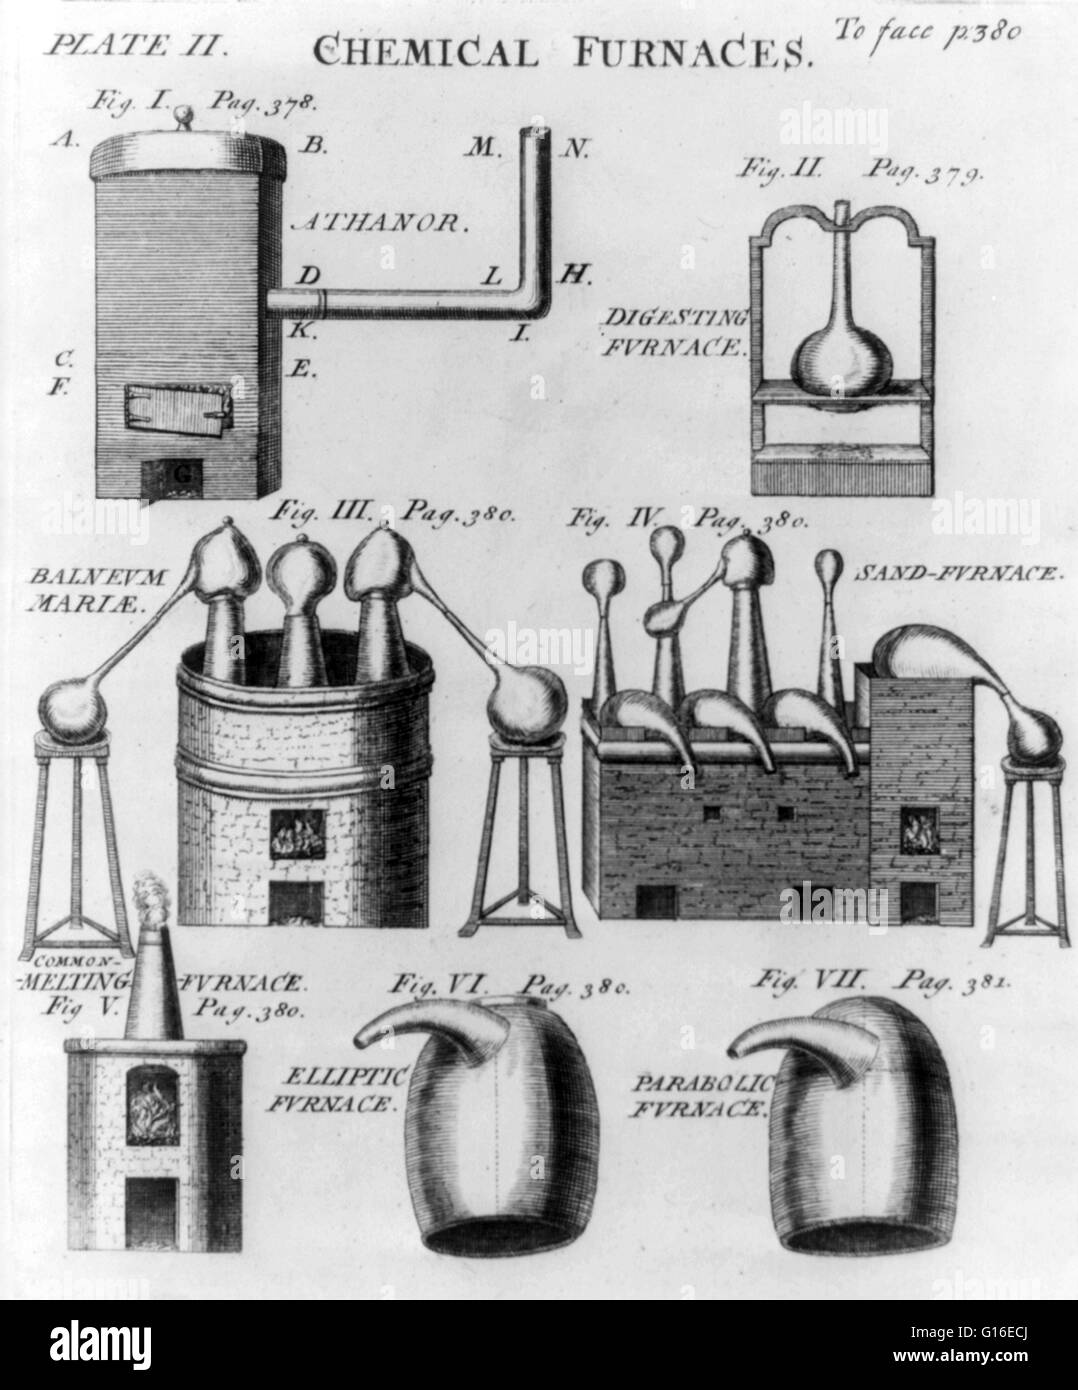 Entitled: 'Chemical furnaces.' Shows a variety of different types of chemical furnaces, such as an athanor, digesting furnace, balneum marae, sand-furnace, melting-furnace, elliptic furnace, and arabolic furnace. Illustration appeared in Elementa chemiae Stock Photo